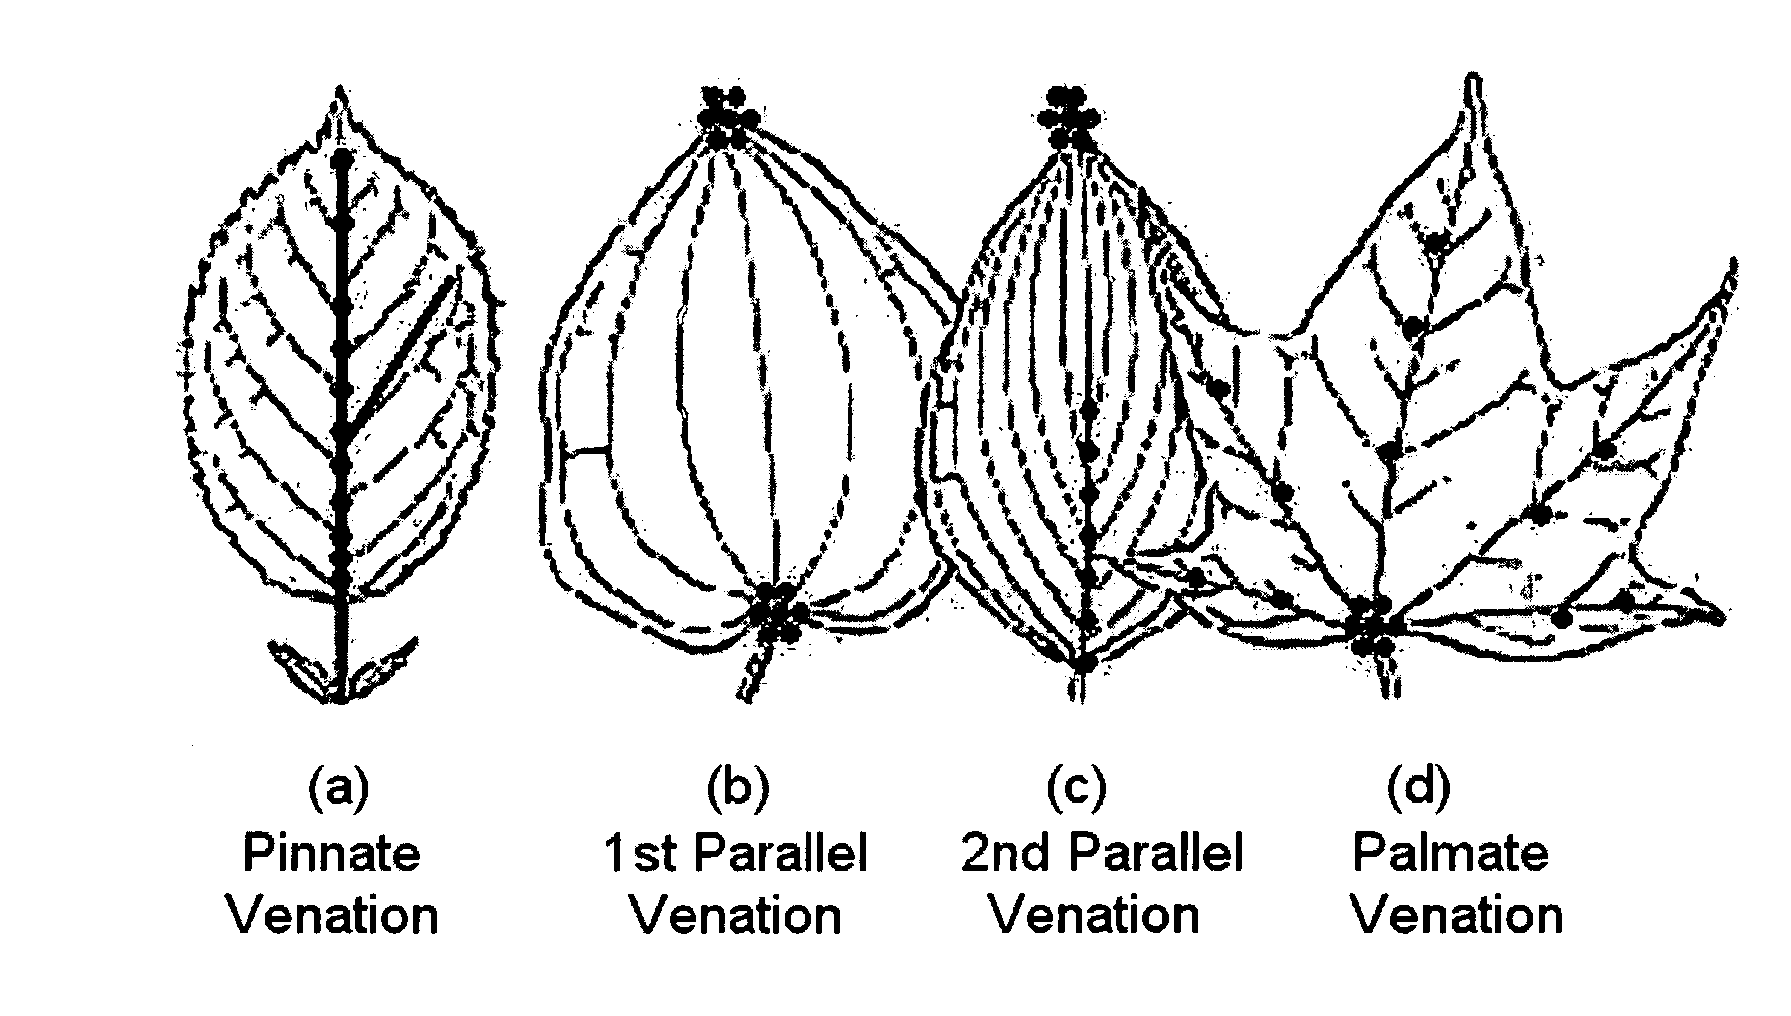 Method for classifying leaves utilizing venation features